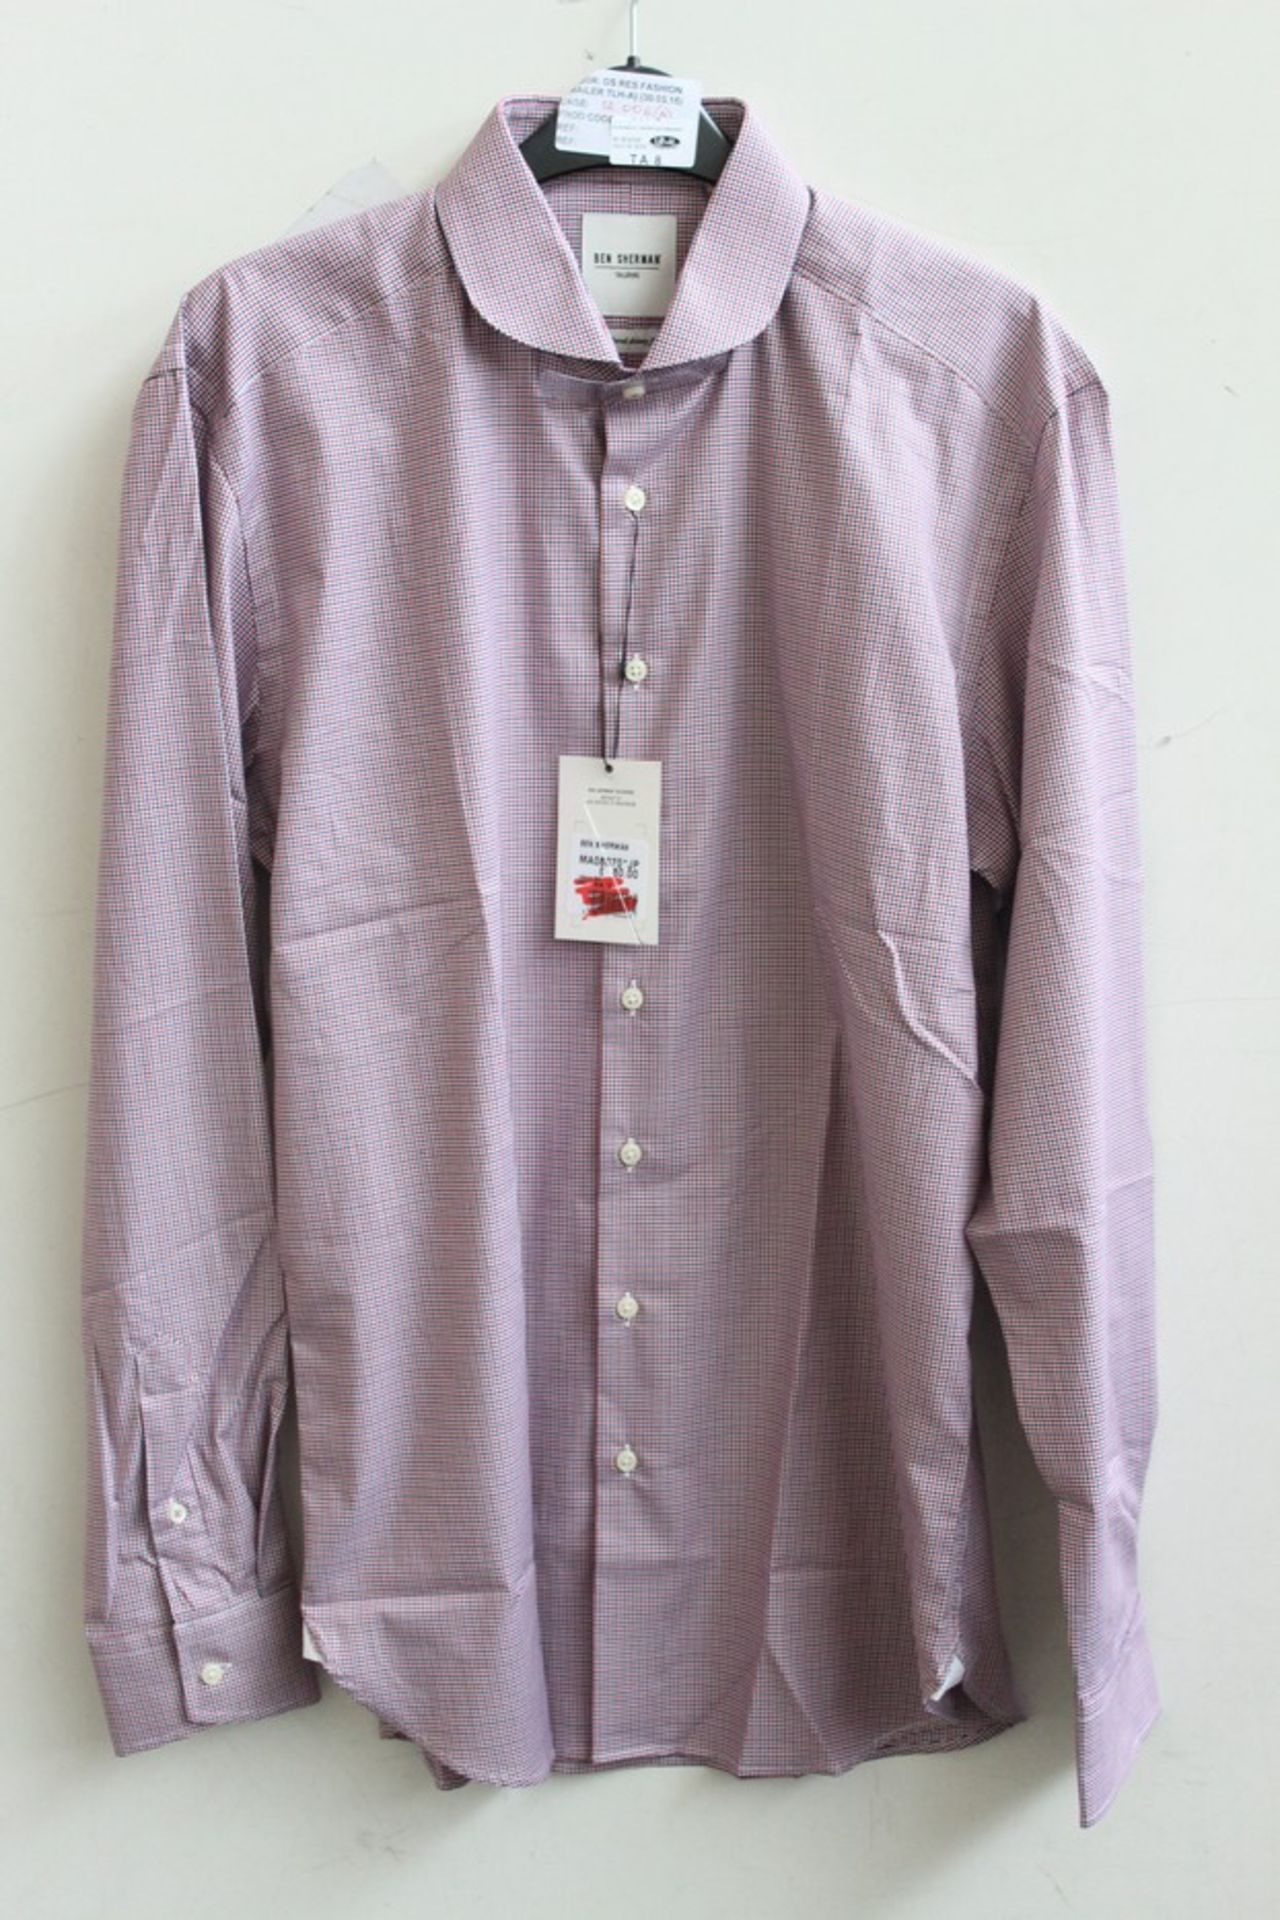 ONE BRAND NEW BEN SHERMAN SHIRT SIZE 16 RRP £80 (DS RES FASHION TRAILER TLH-A CAGE 12.006A